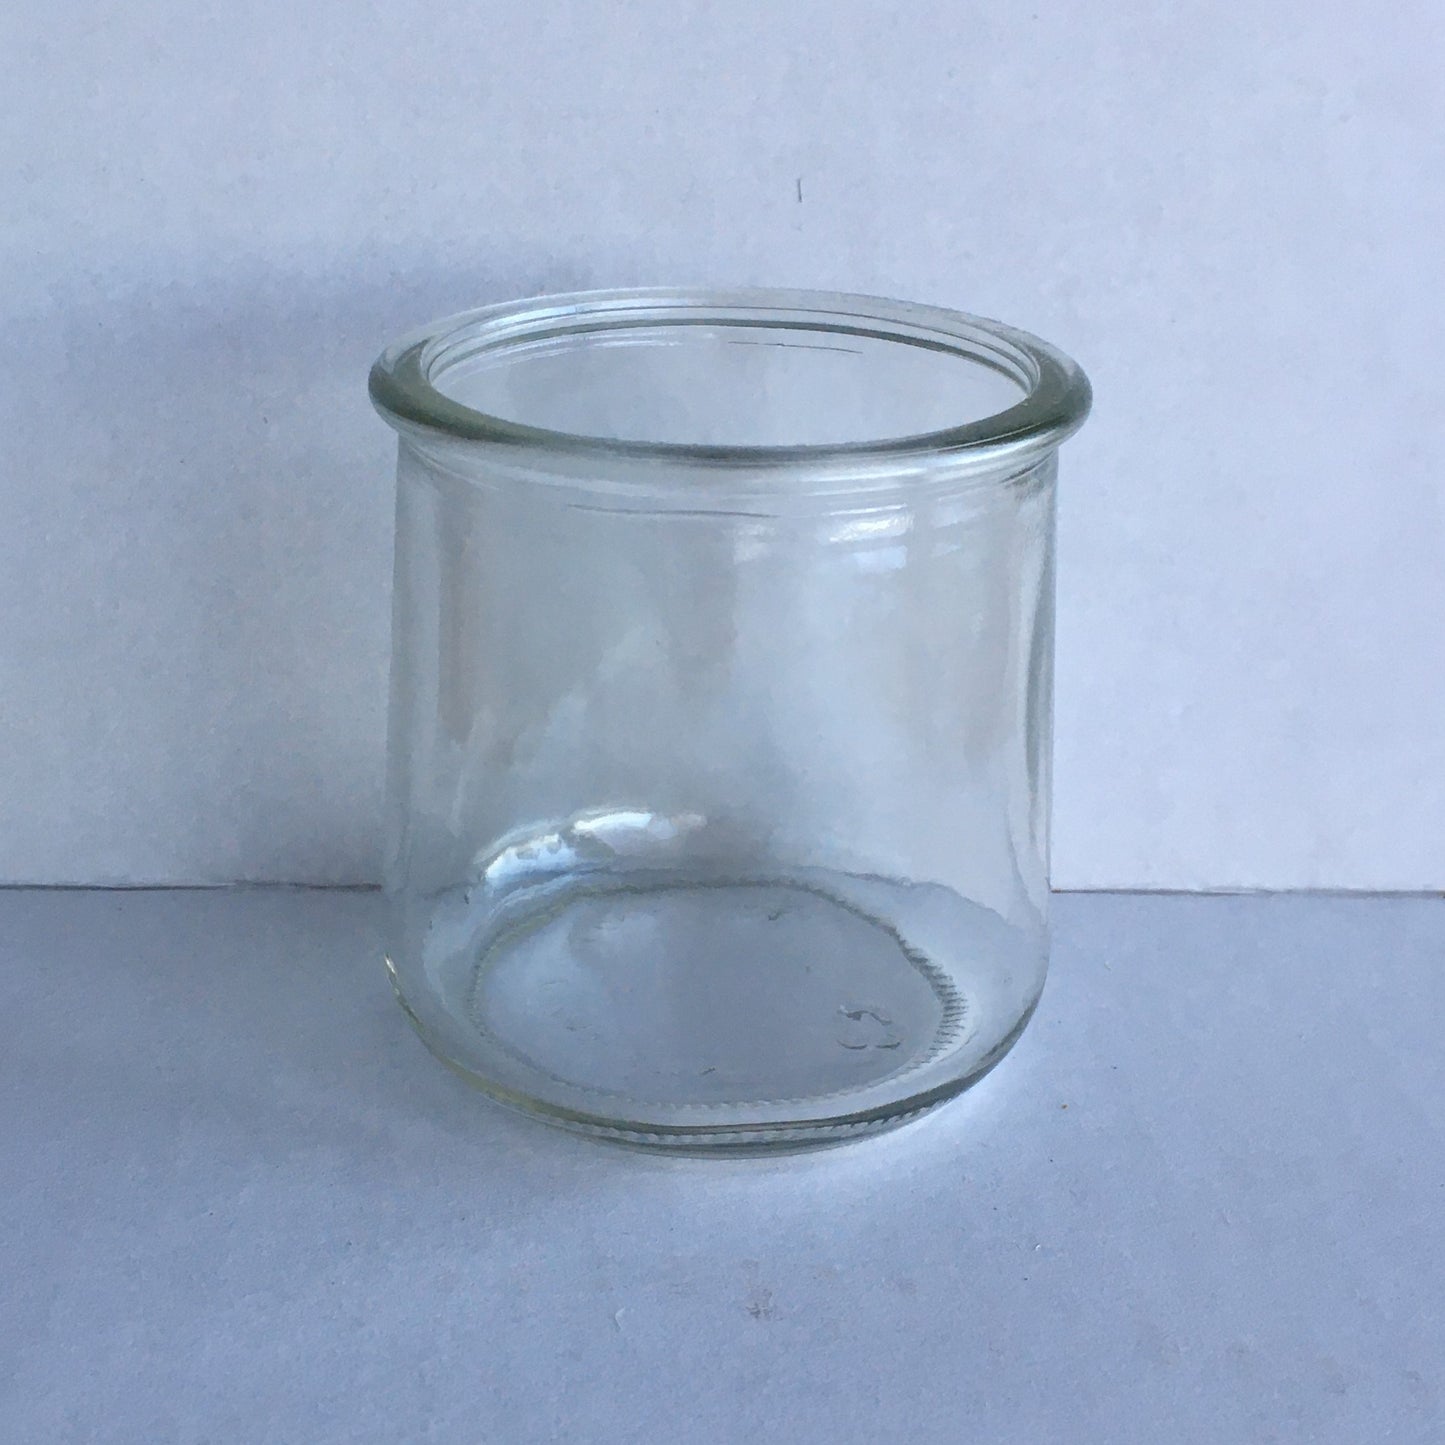 Glass Candle Jars - set of 4